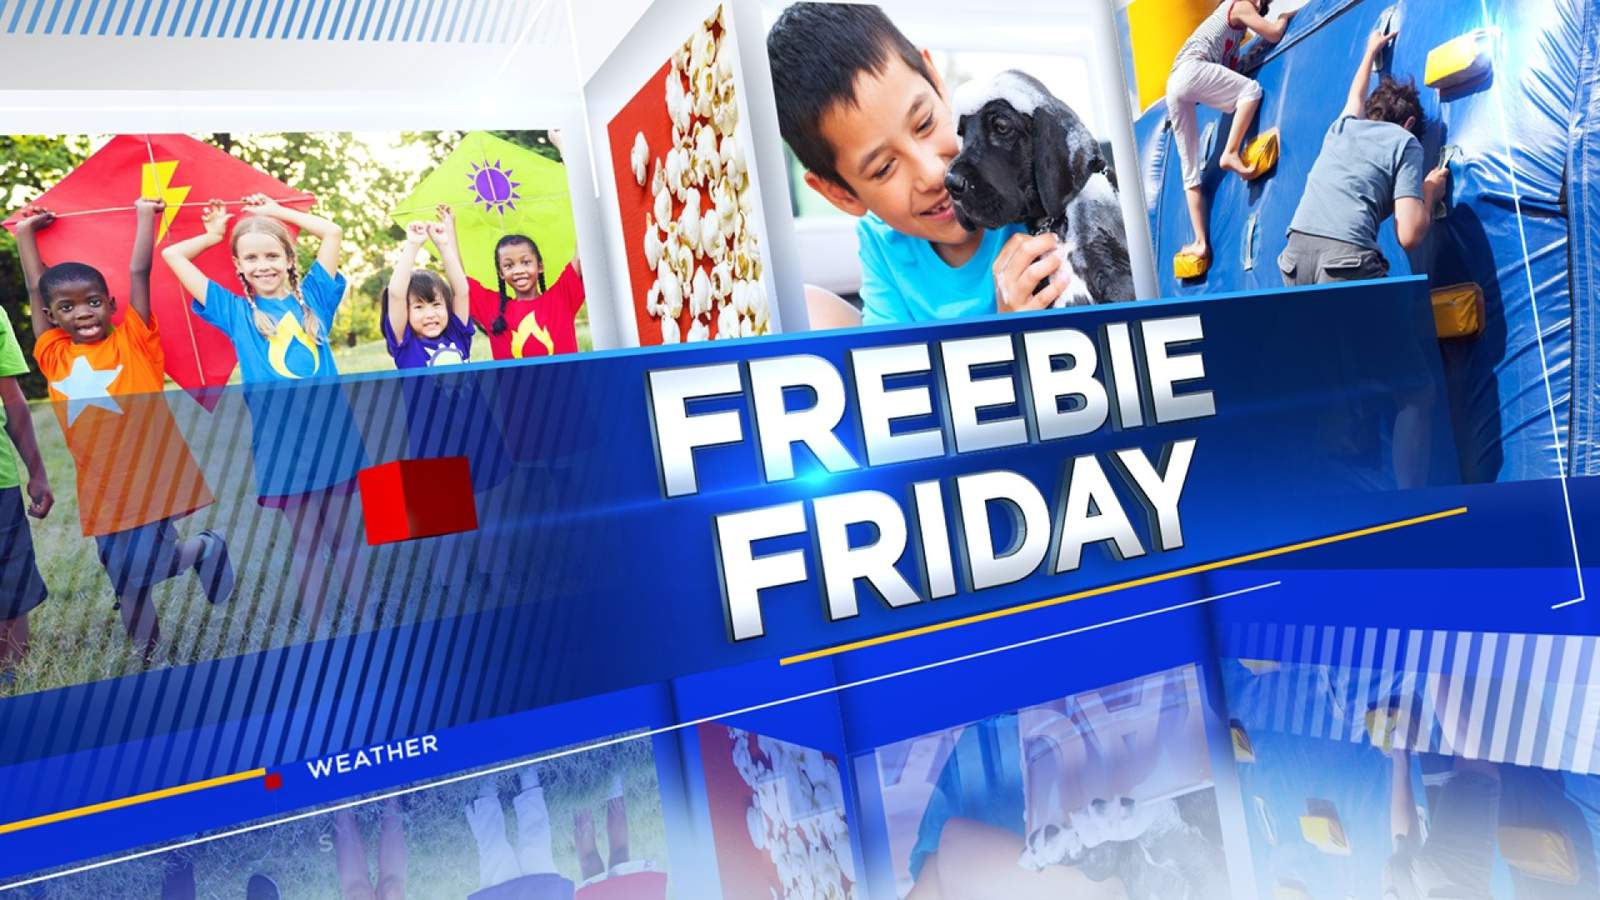 Freebie Friday: Films, fitness and fireworks